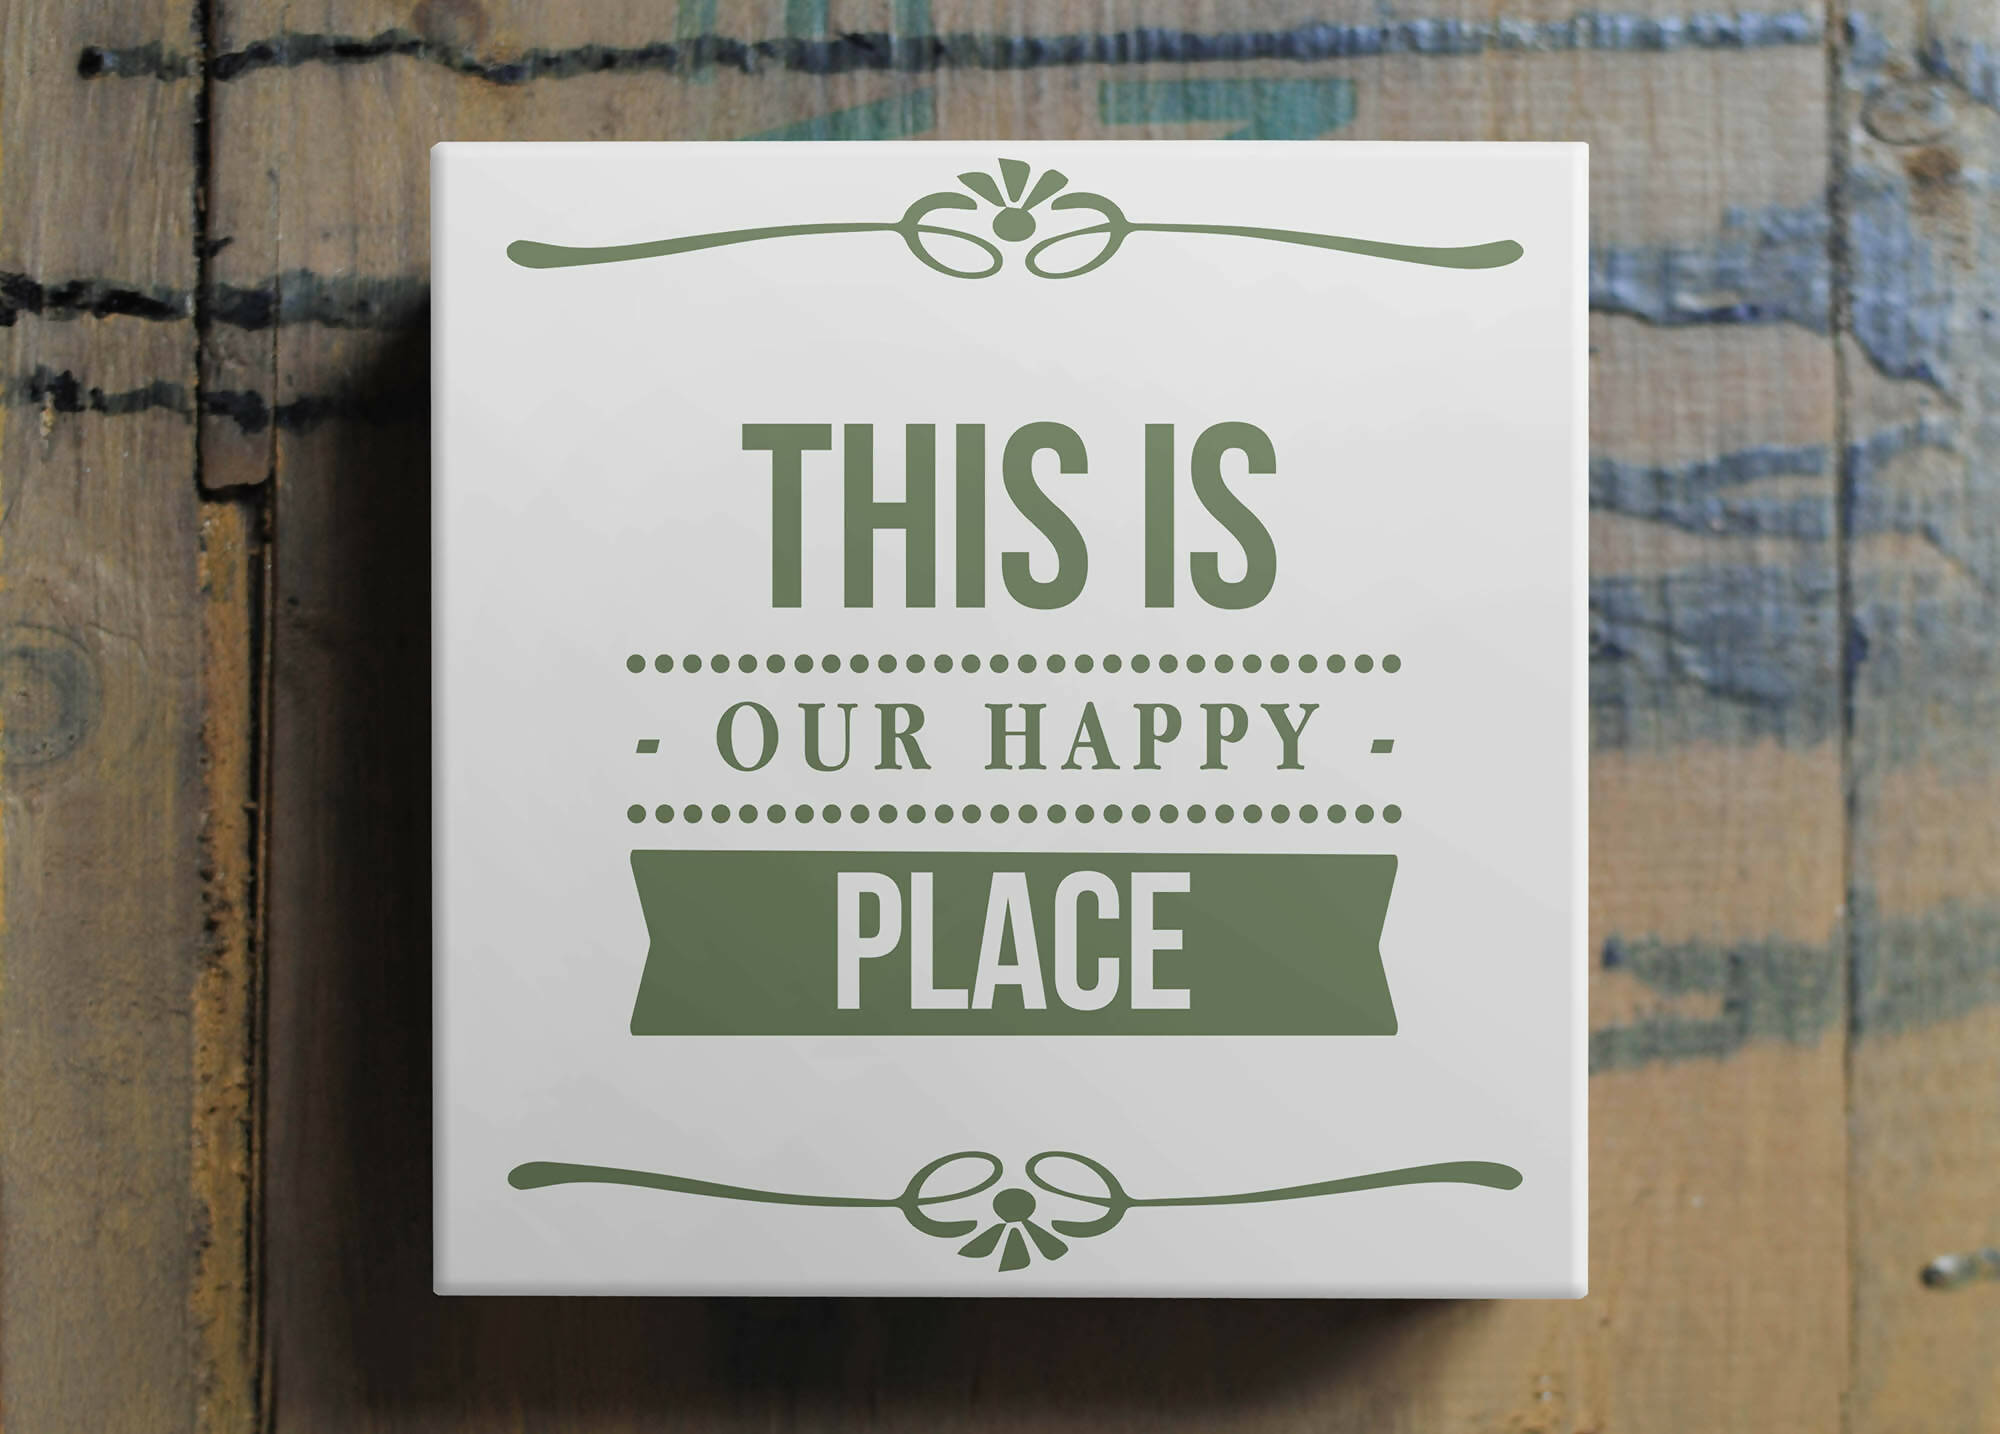 Azulejo frases y refranes: This is our happy place.